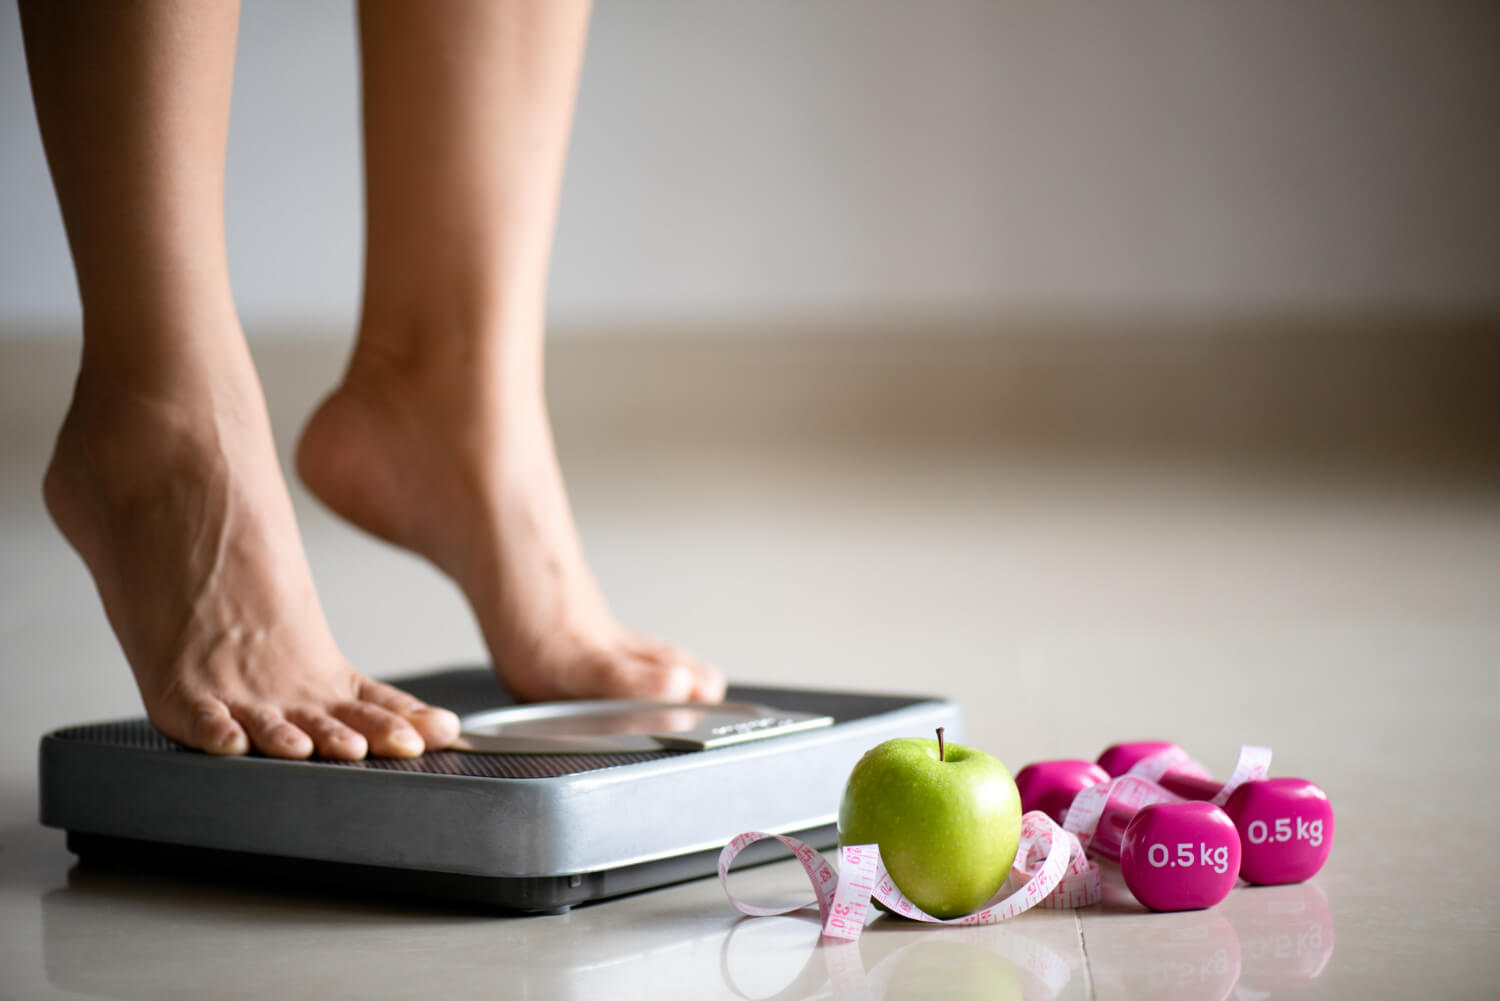 Want to see better results with weight loss? This hack might make the difference